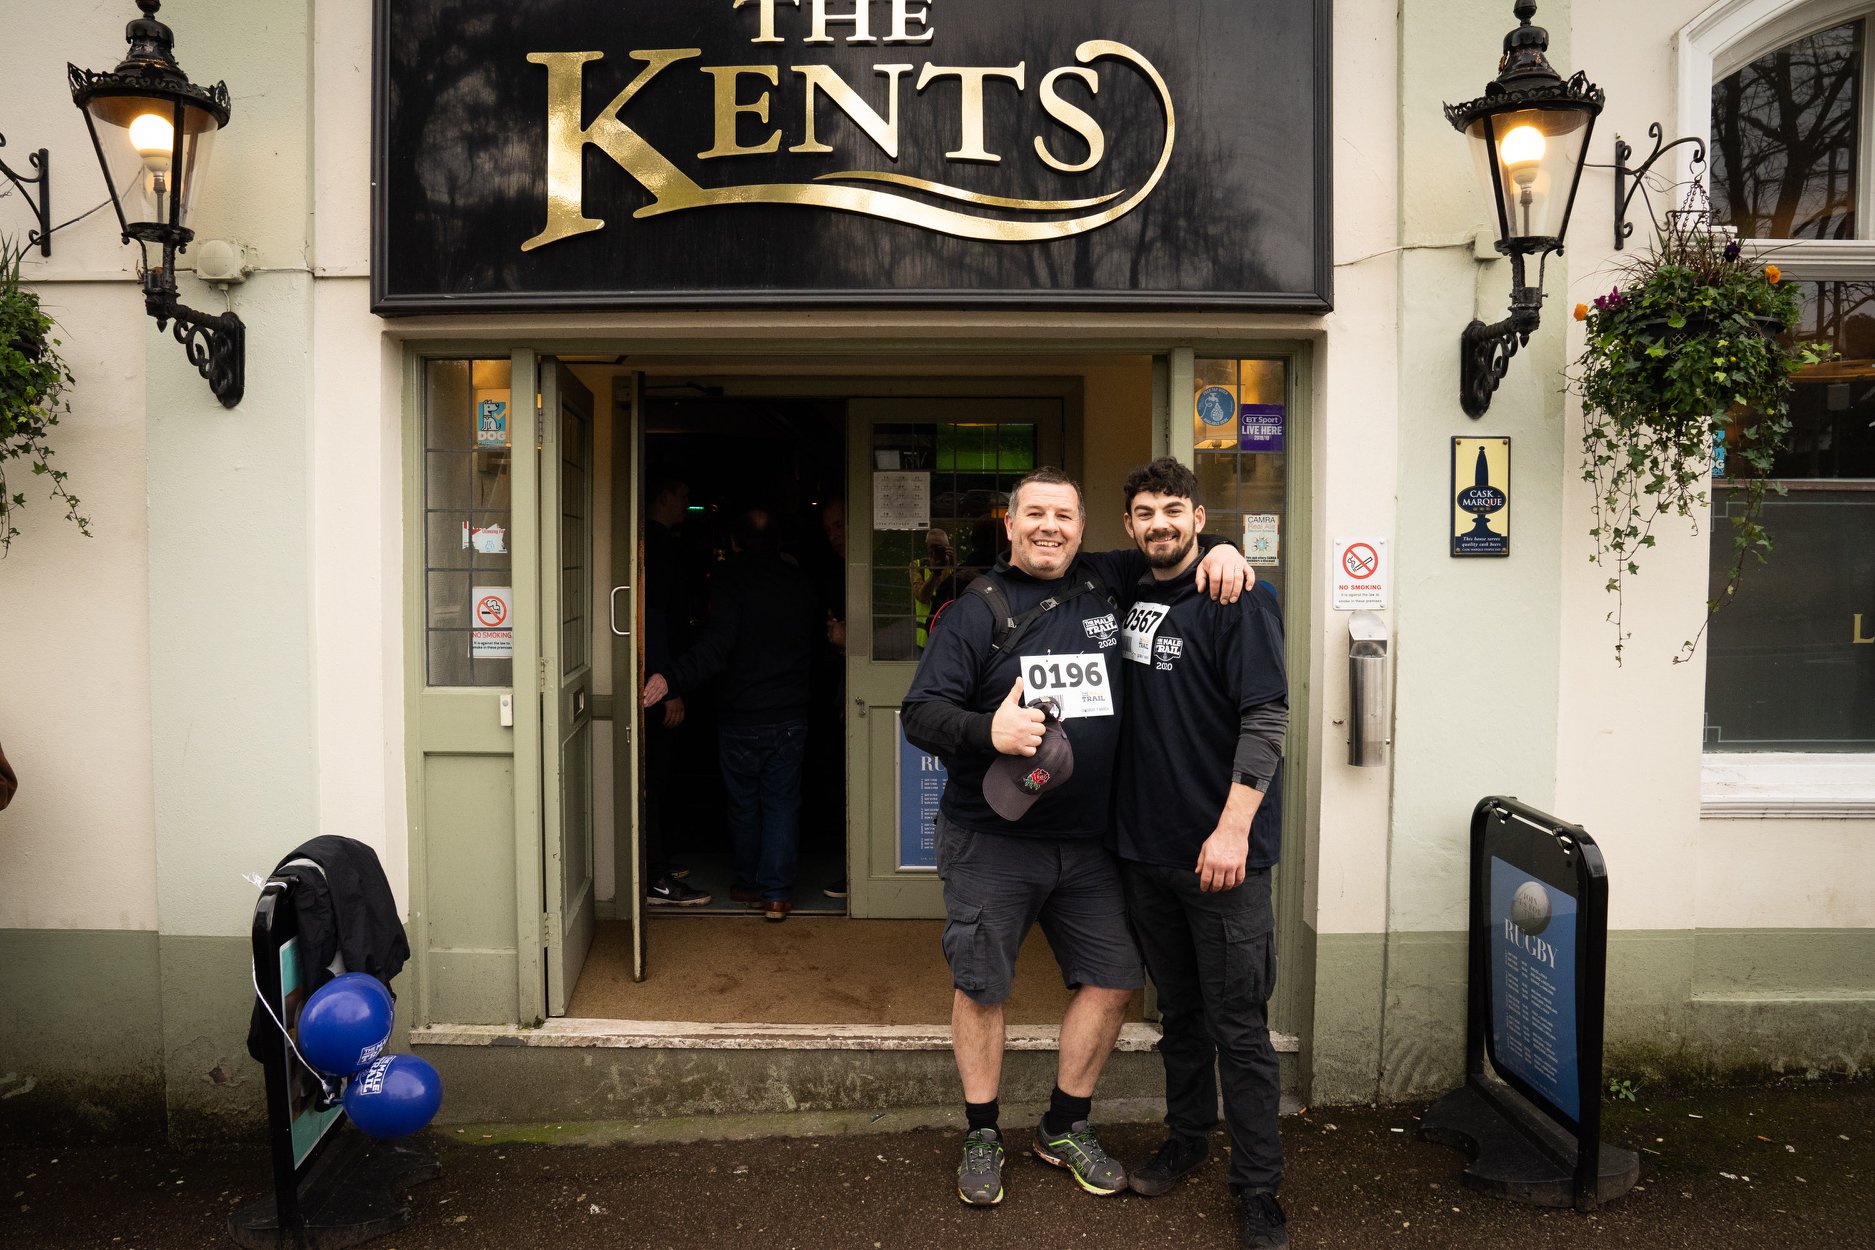 Two people who are taking part in the Male Trail pose for a photo outside of "The Kents"